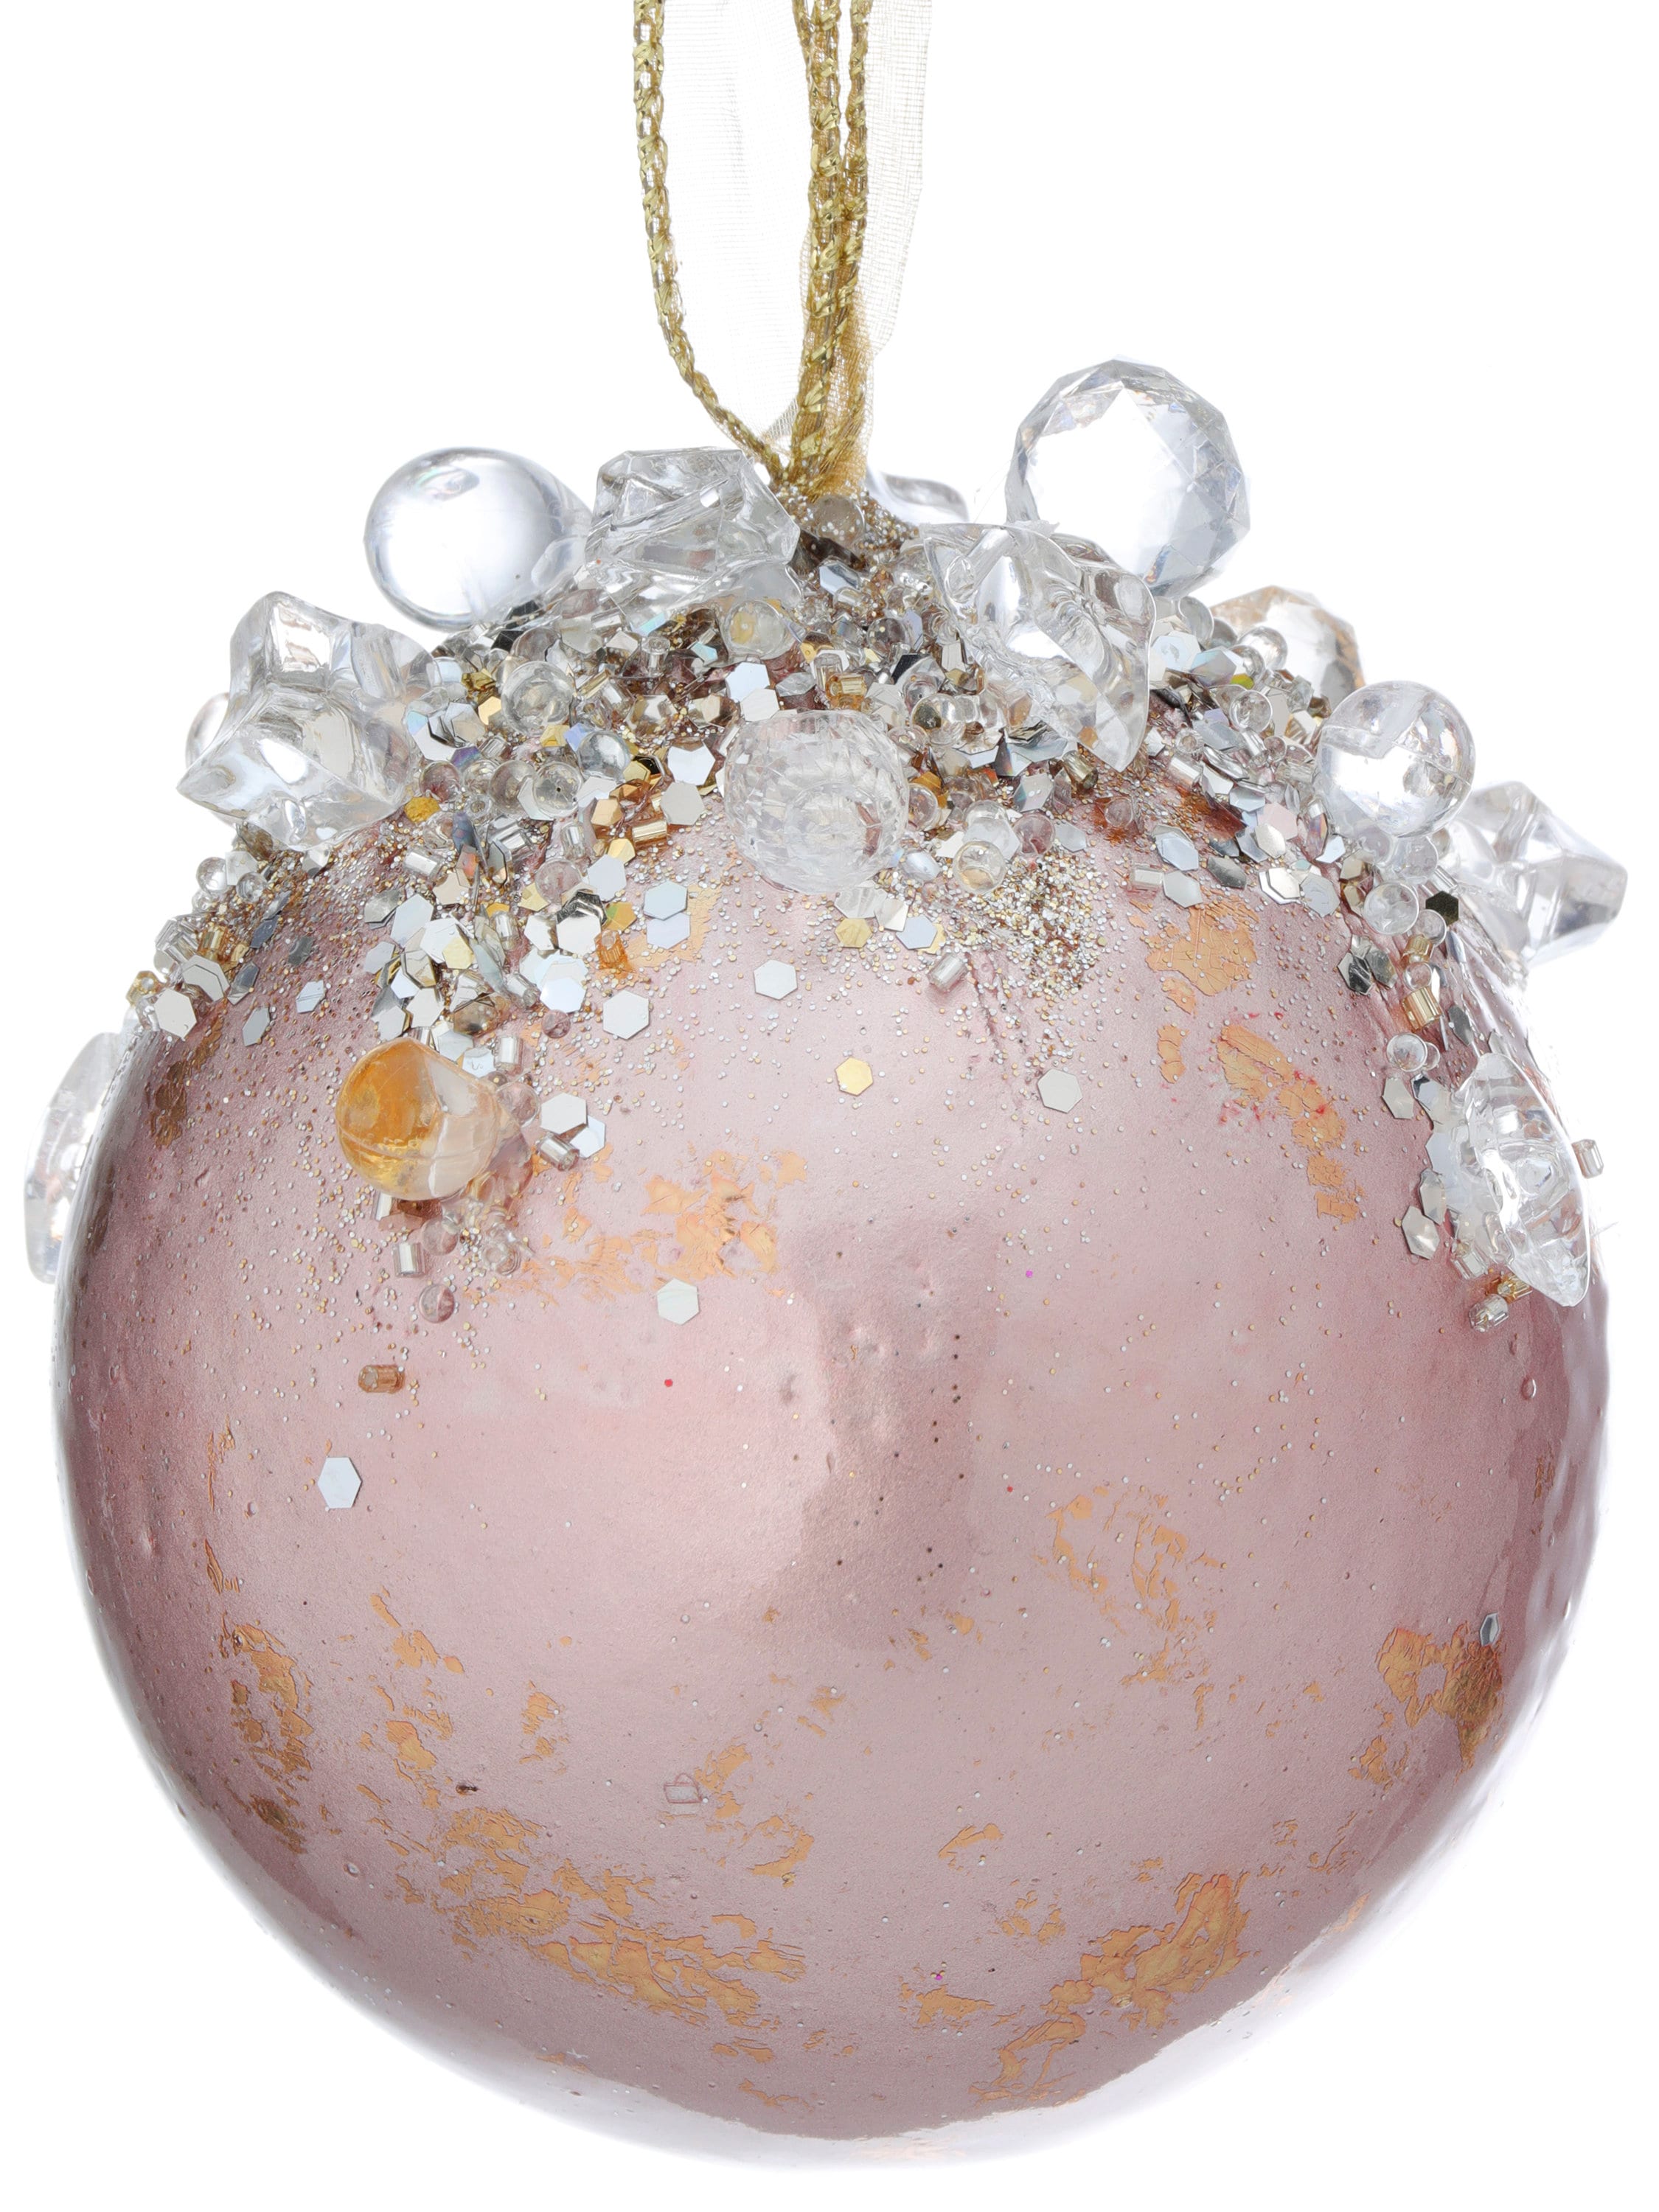 Rose Gold Heavy Jeweled Ornament Ball 4 in., Rose Gold Christmas Tree Ornament, Rose Gold Wreath Attachment, Rose Gold Christmas Decorations